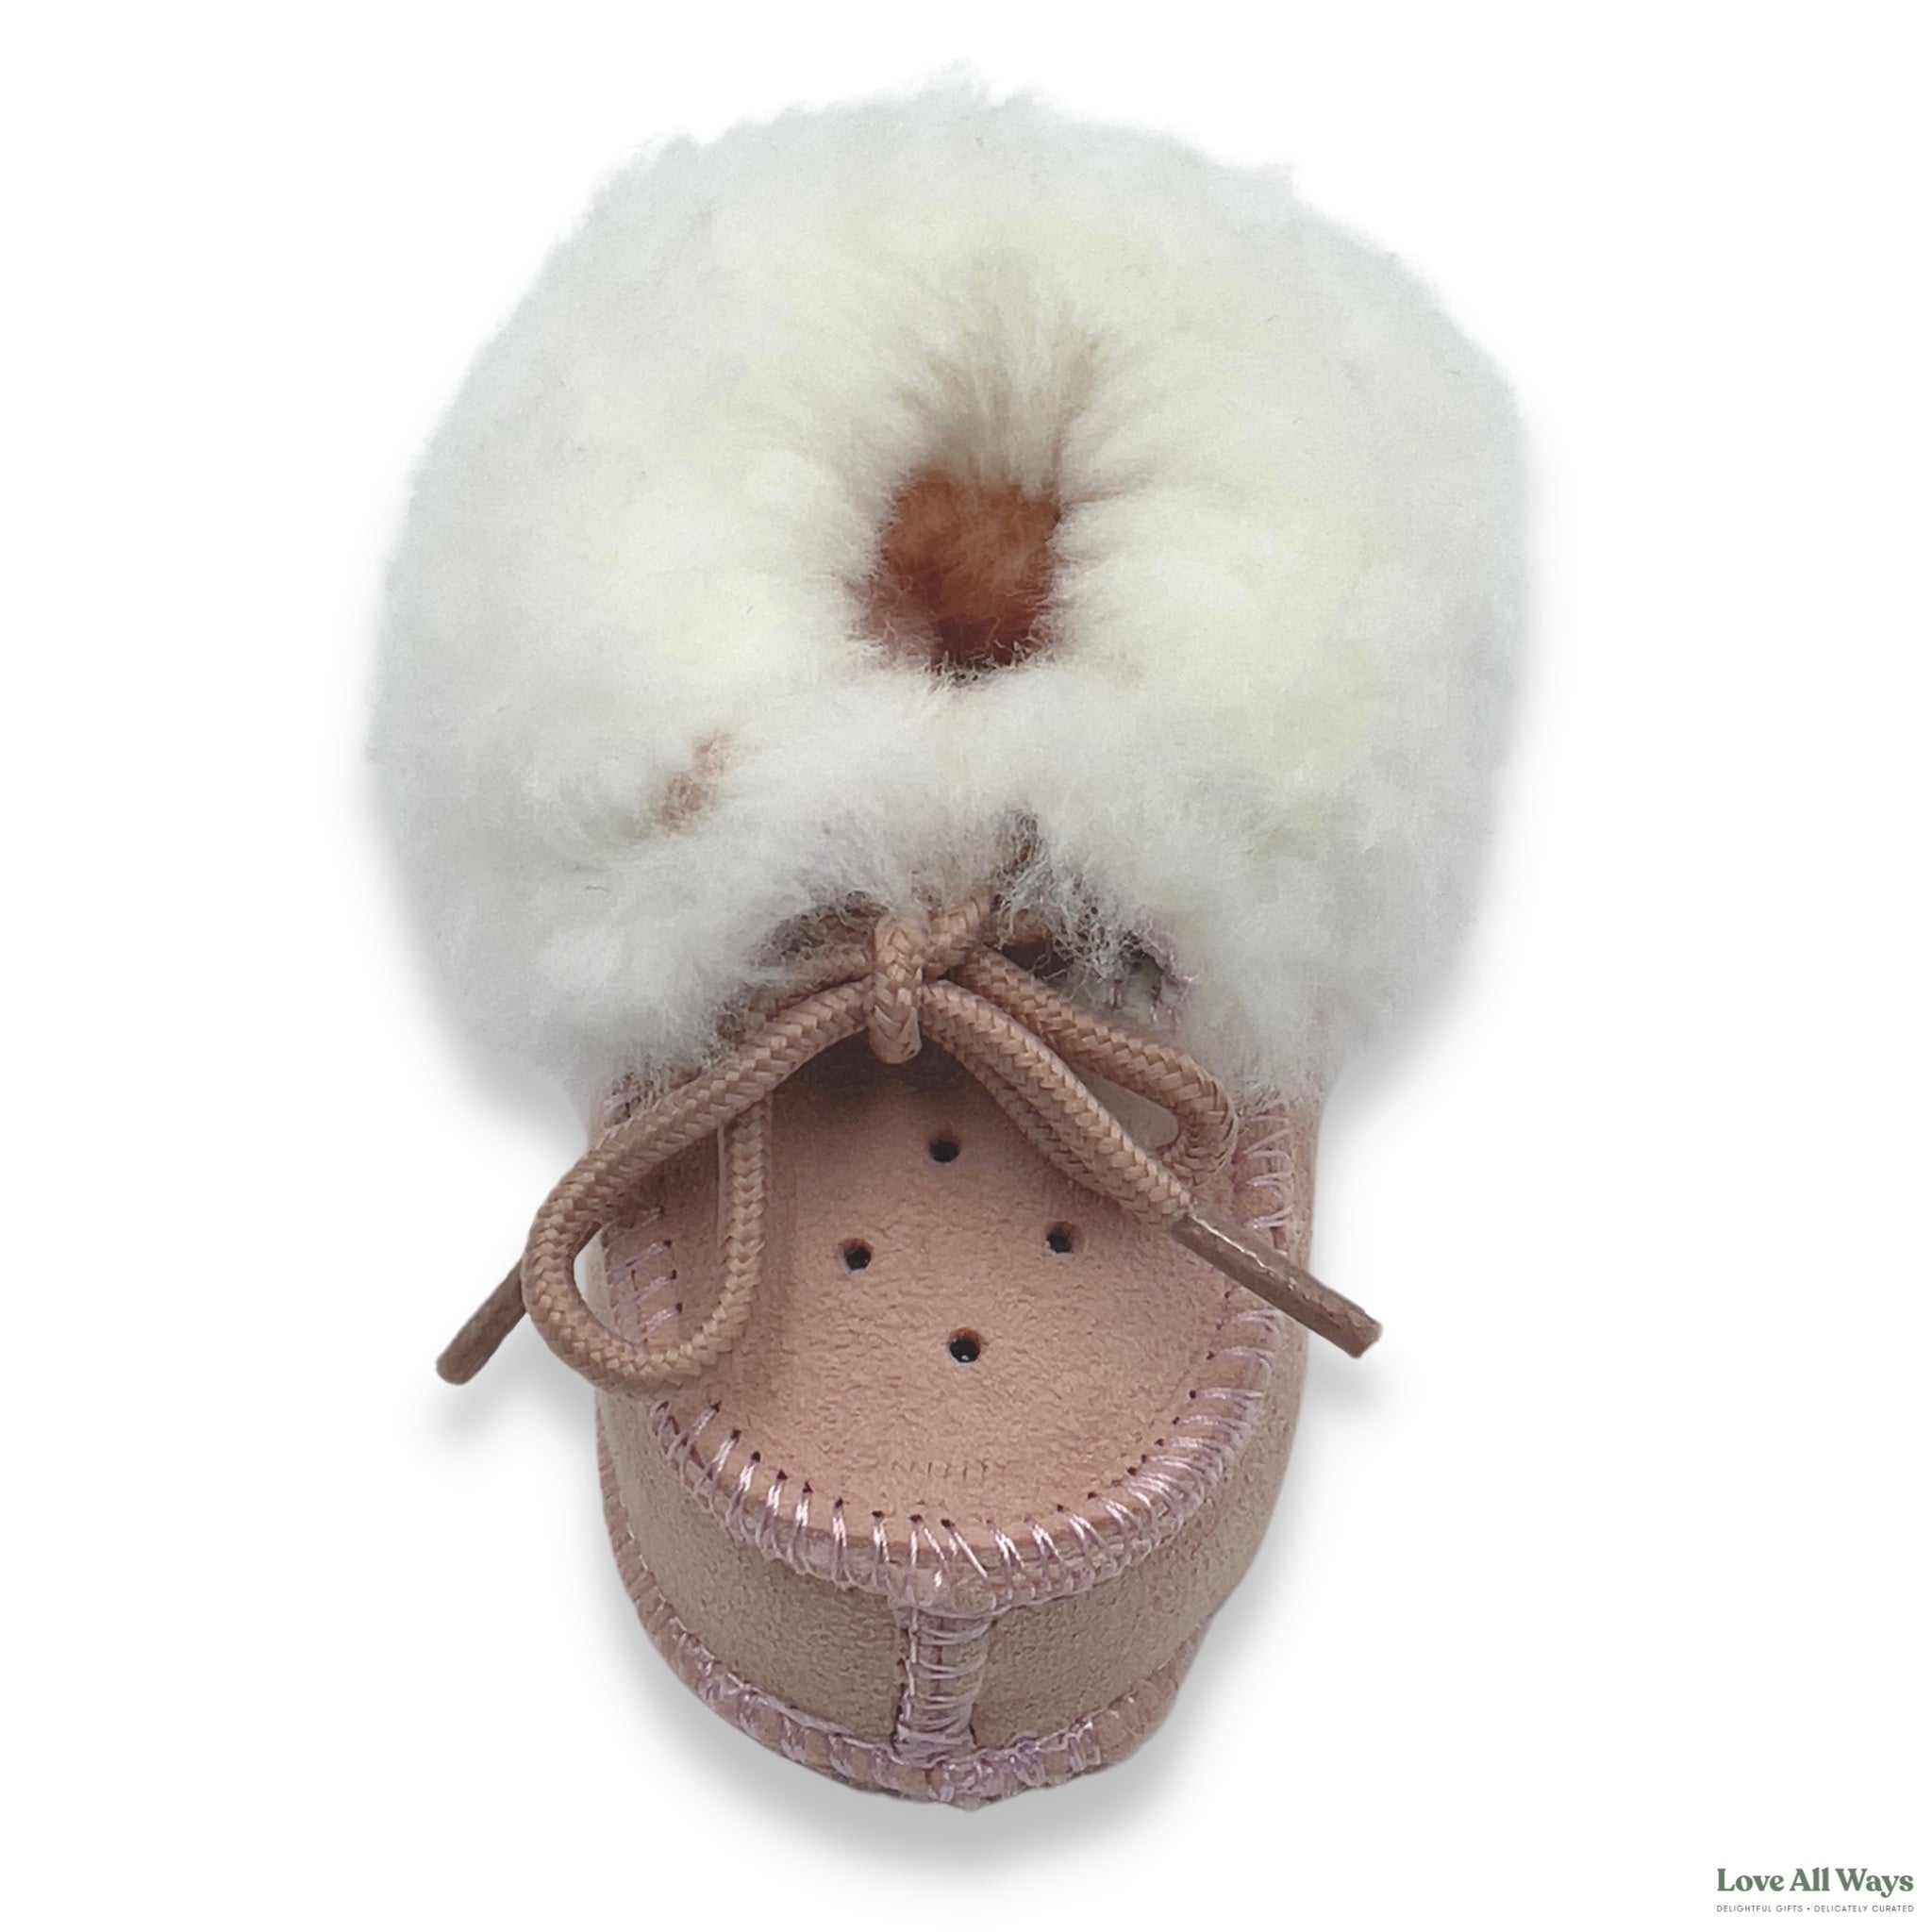 100% Australian & New Zealand Lambs Wool Booties - Frosted Pink